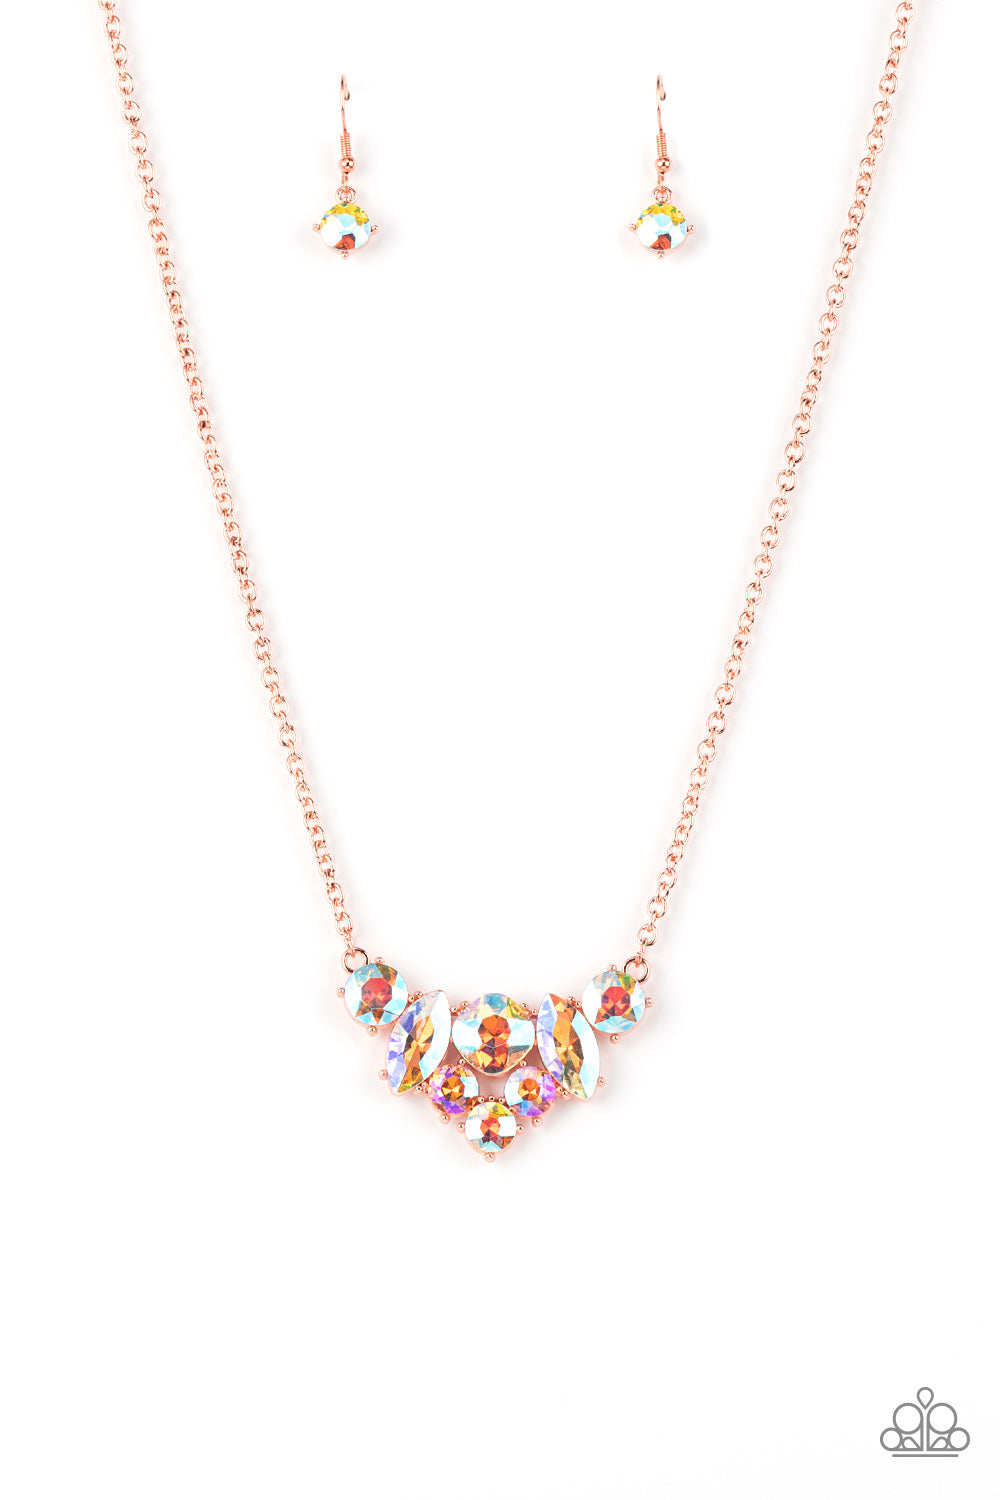 five-dollar-jewelry-lavishly-loaded-copper-necklace-paparazzi-accessories